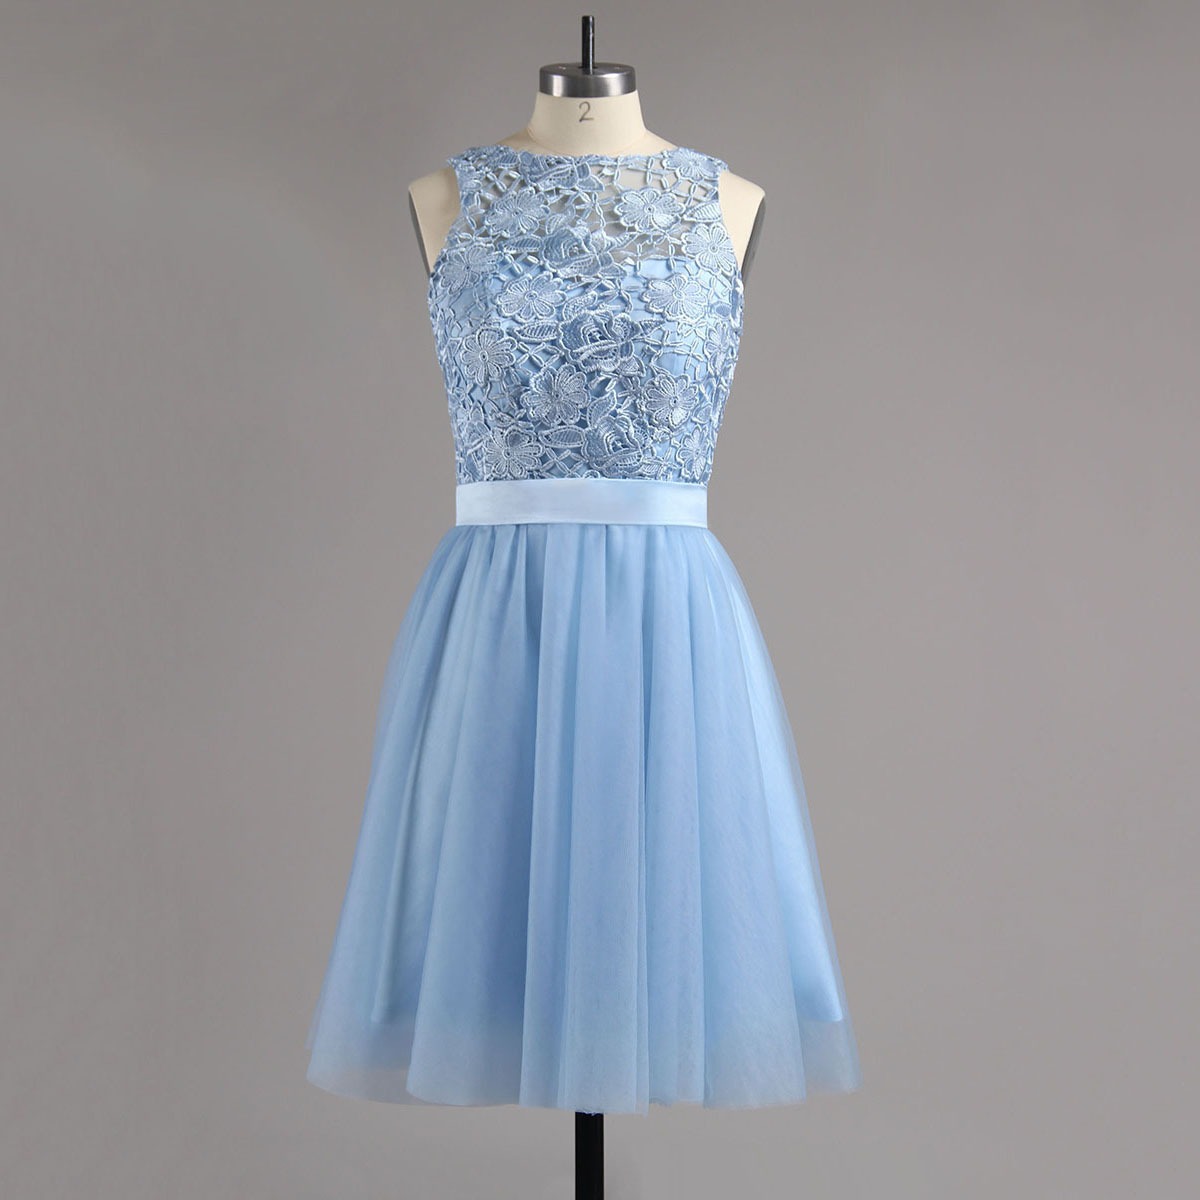 Jewel Ice Blue Homecoming Dress With Sash Illusion Tulle Homecoming